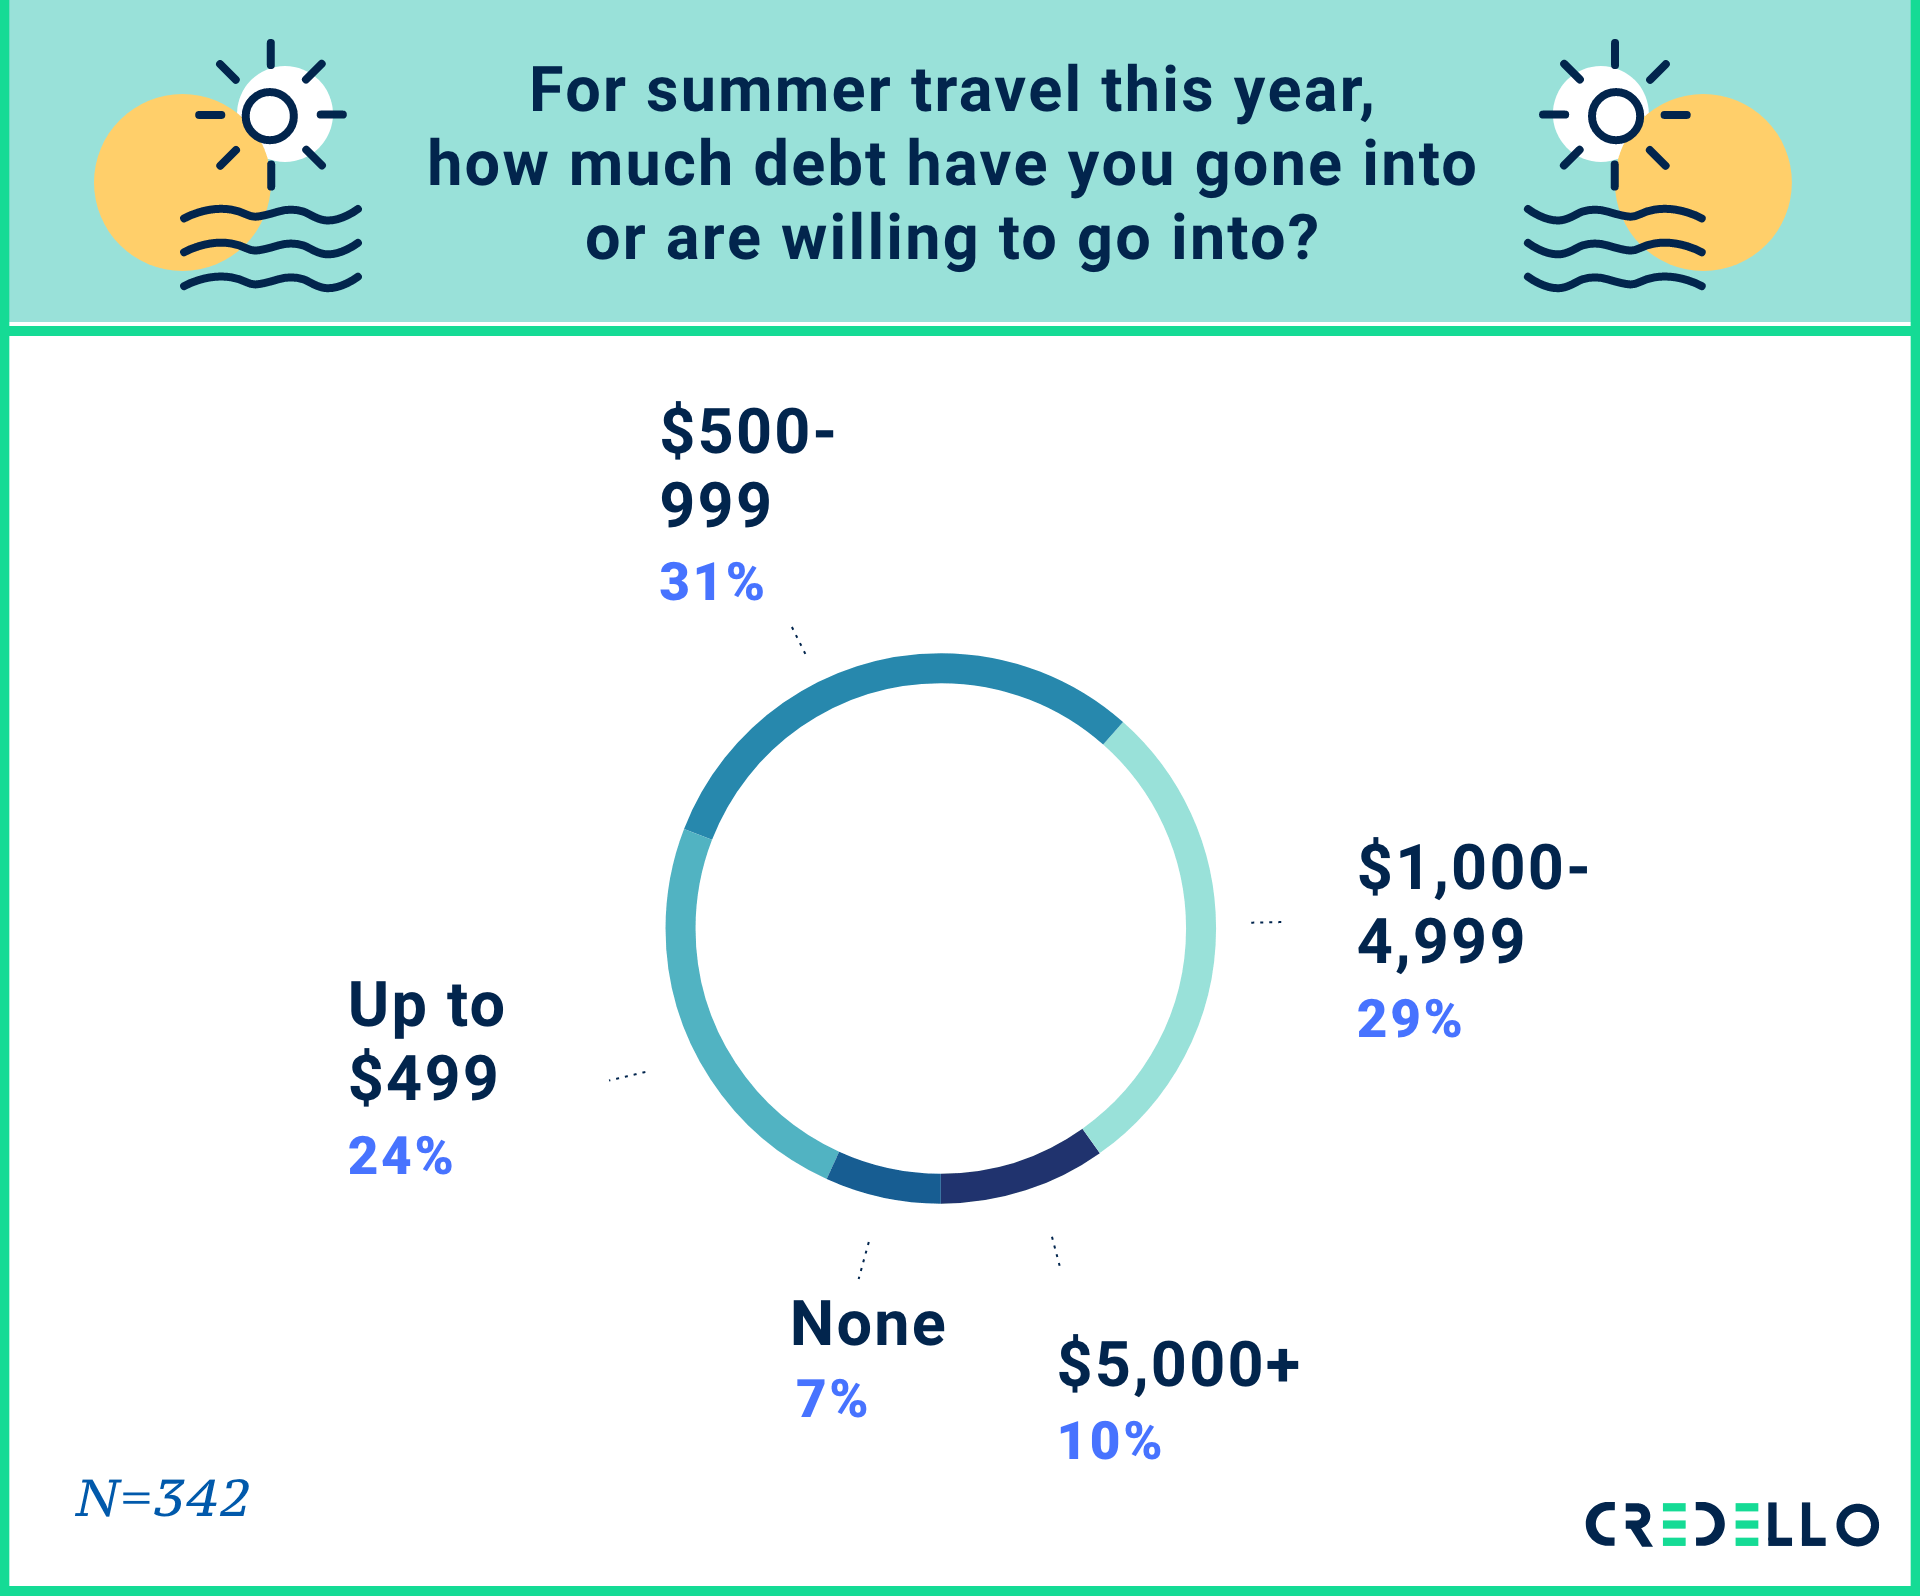 for summer travel this year, how much debt have you gone into or are willing to go into